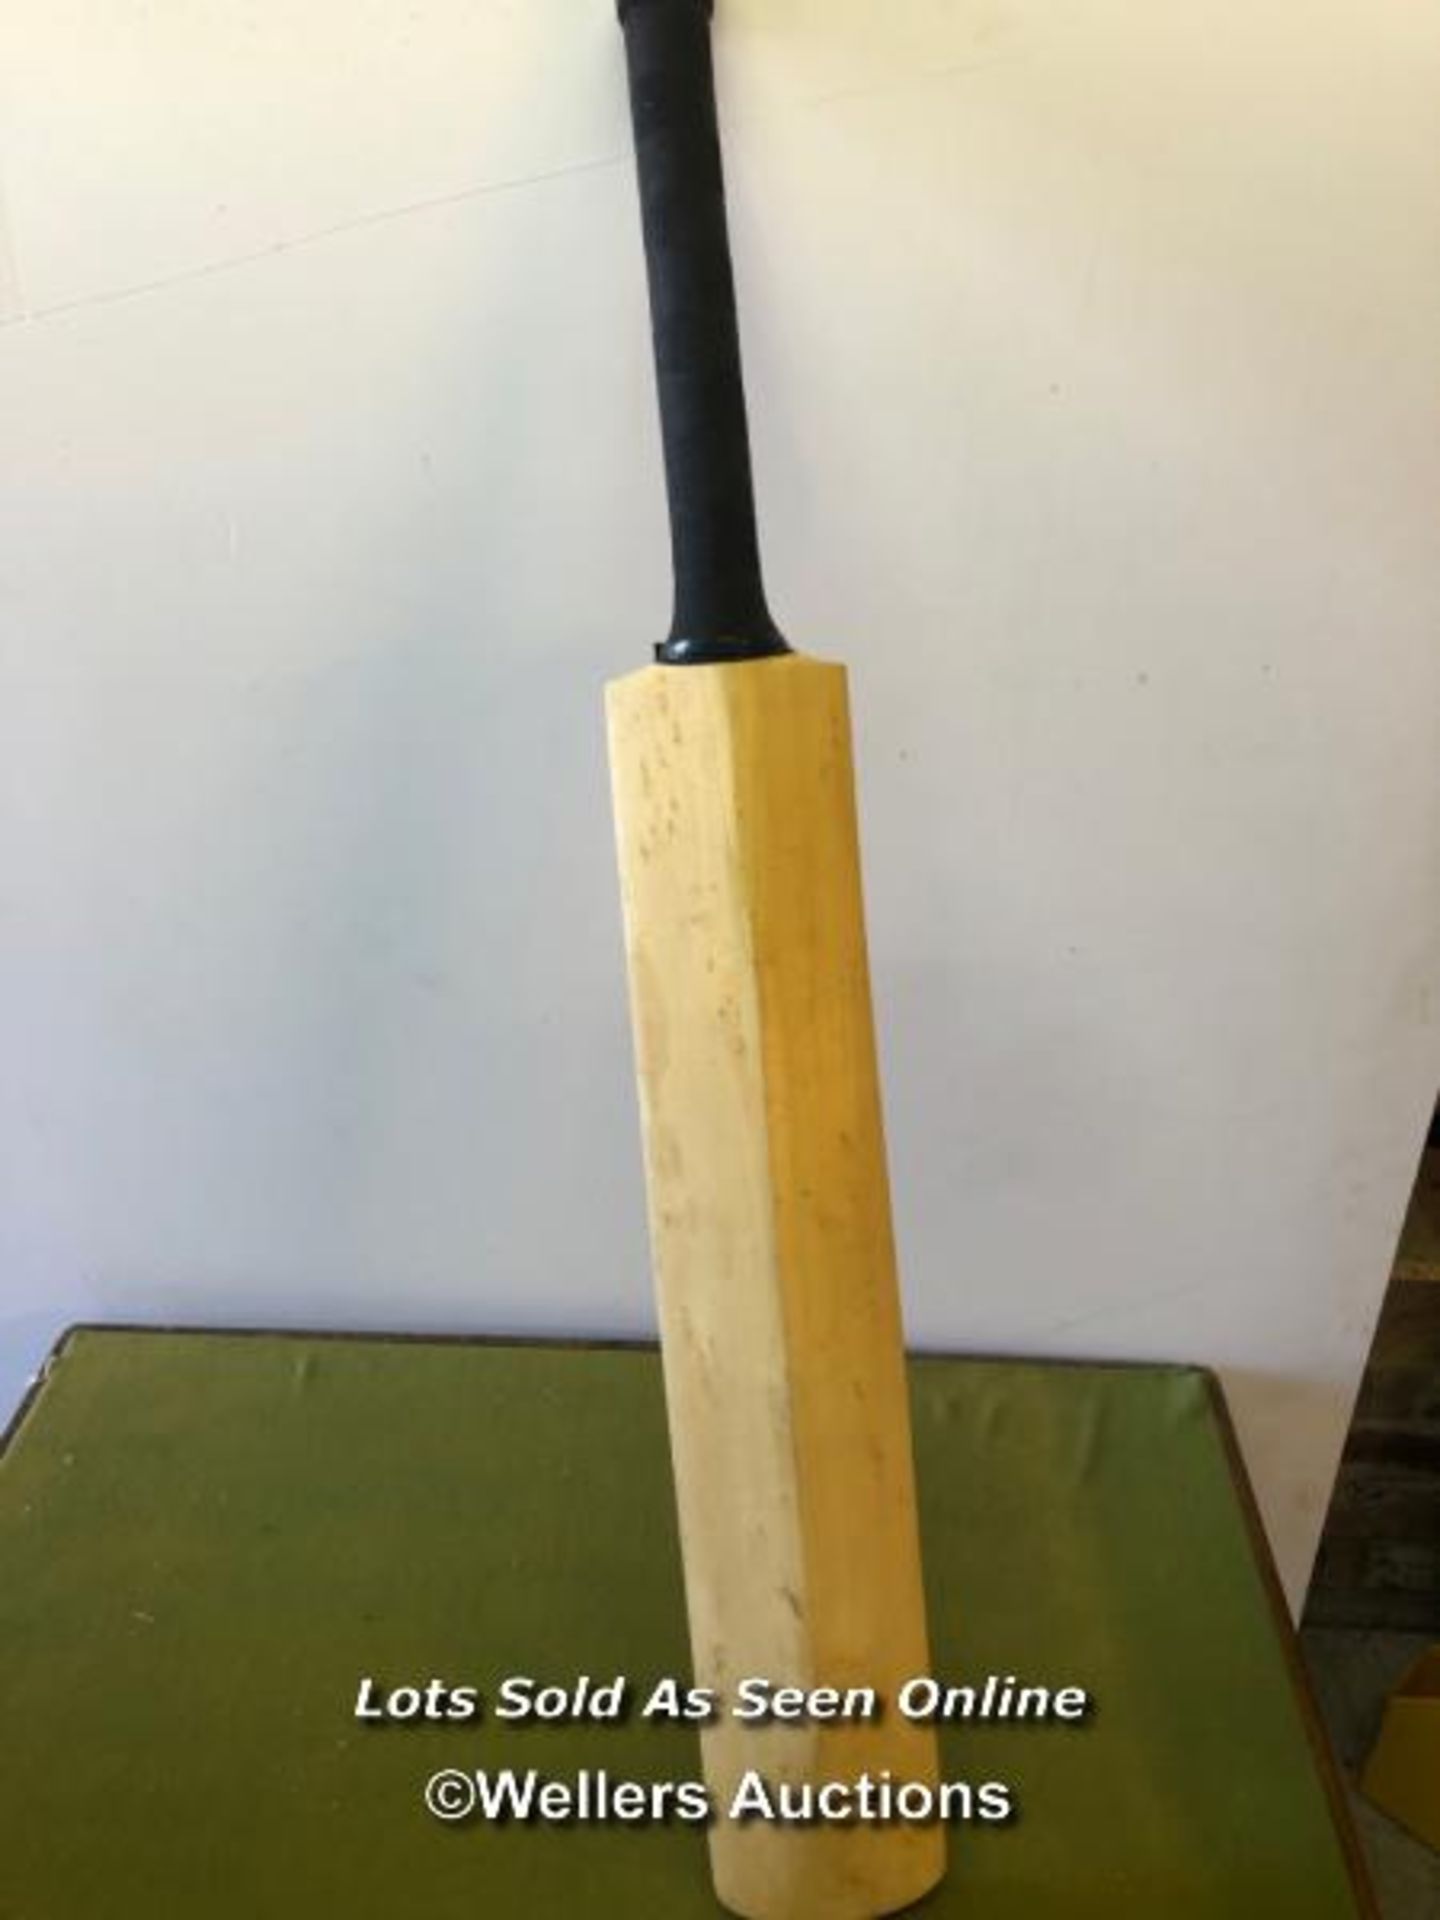 CRICKET BAT SIGNED BY THE SUSSEX CCC 2006, INCLUDING MATT PRIOR'S SIGNATURE - Image 4 of 4